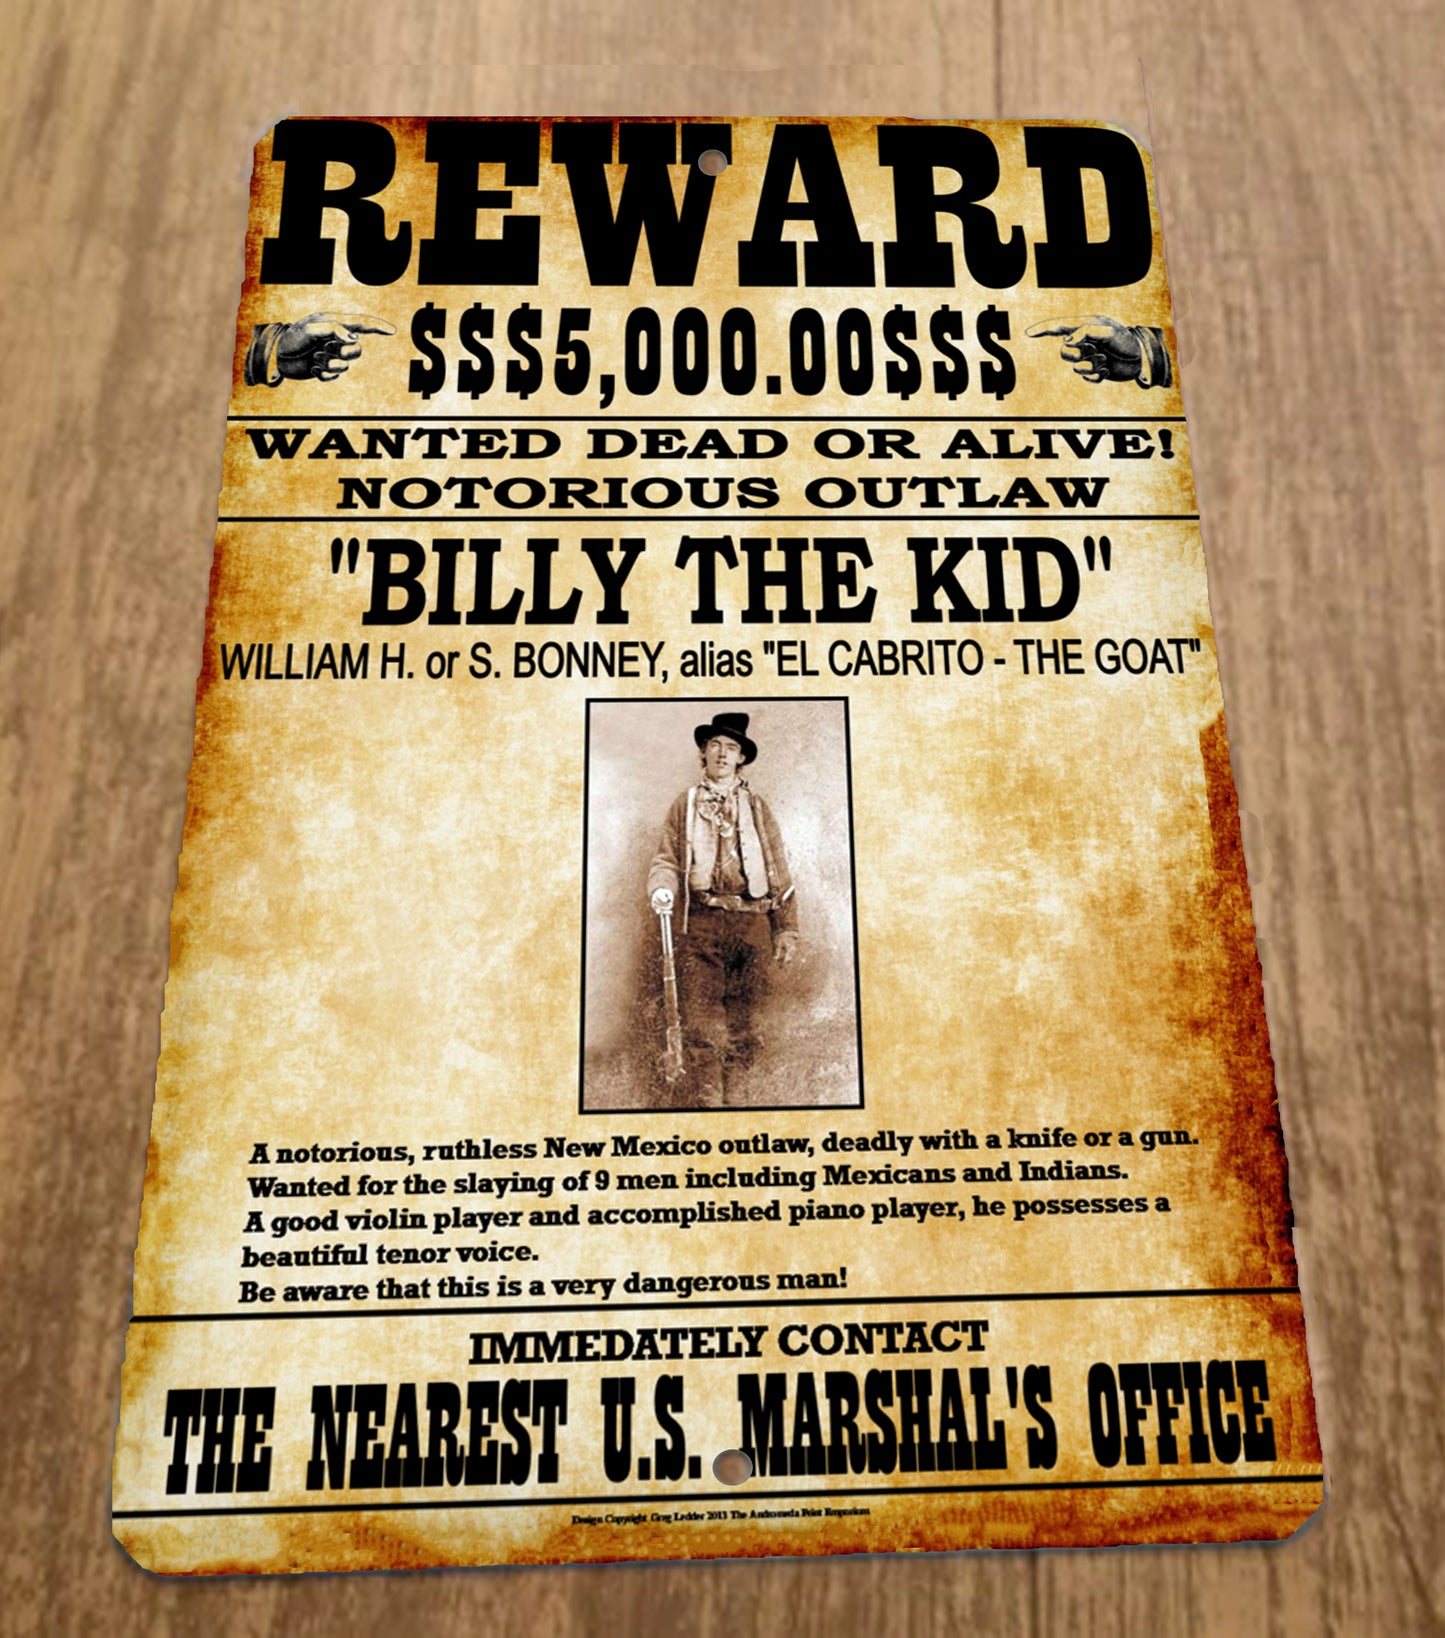 Reward $5000 Wanted Dead or Alive Billy The Kid Wanted Poster 8x12 Metal Wall Sign